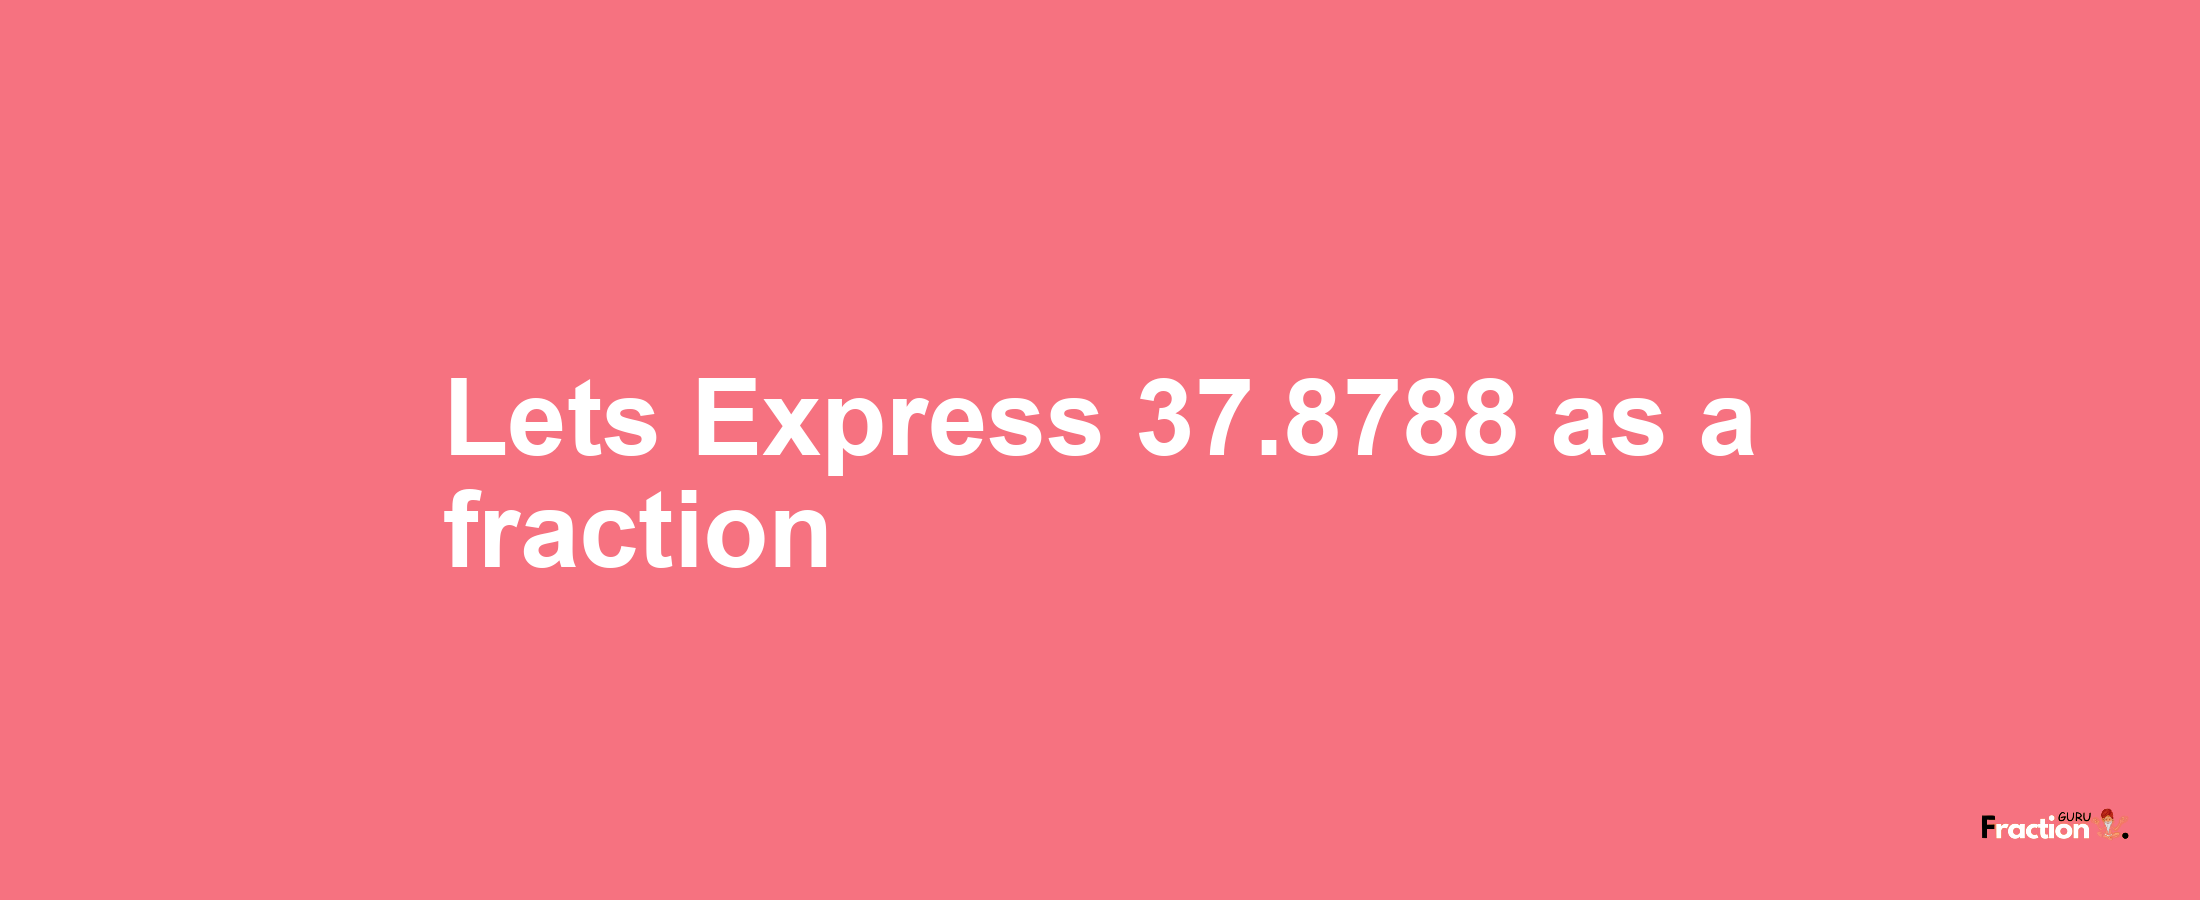 Lets Express 37.8788 as afraction